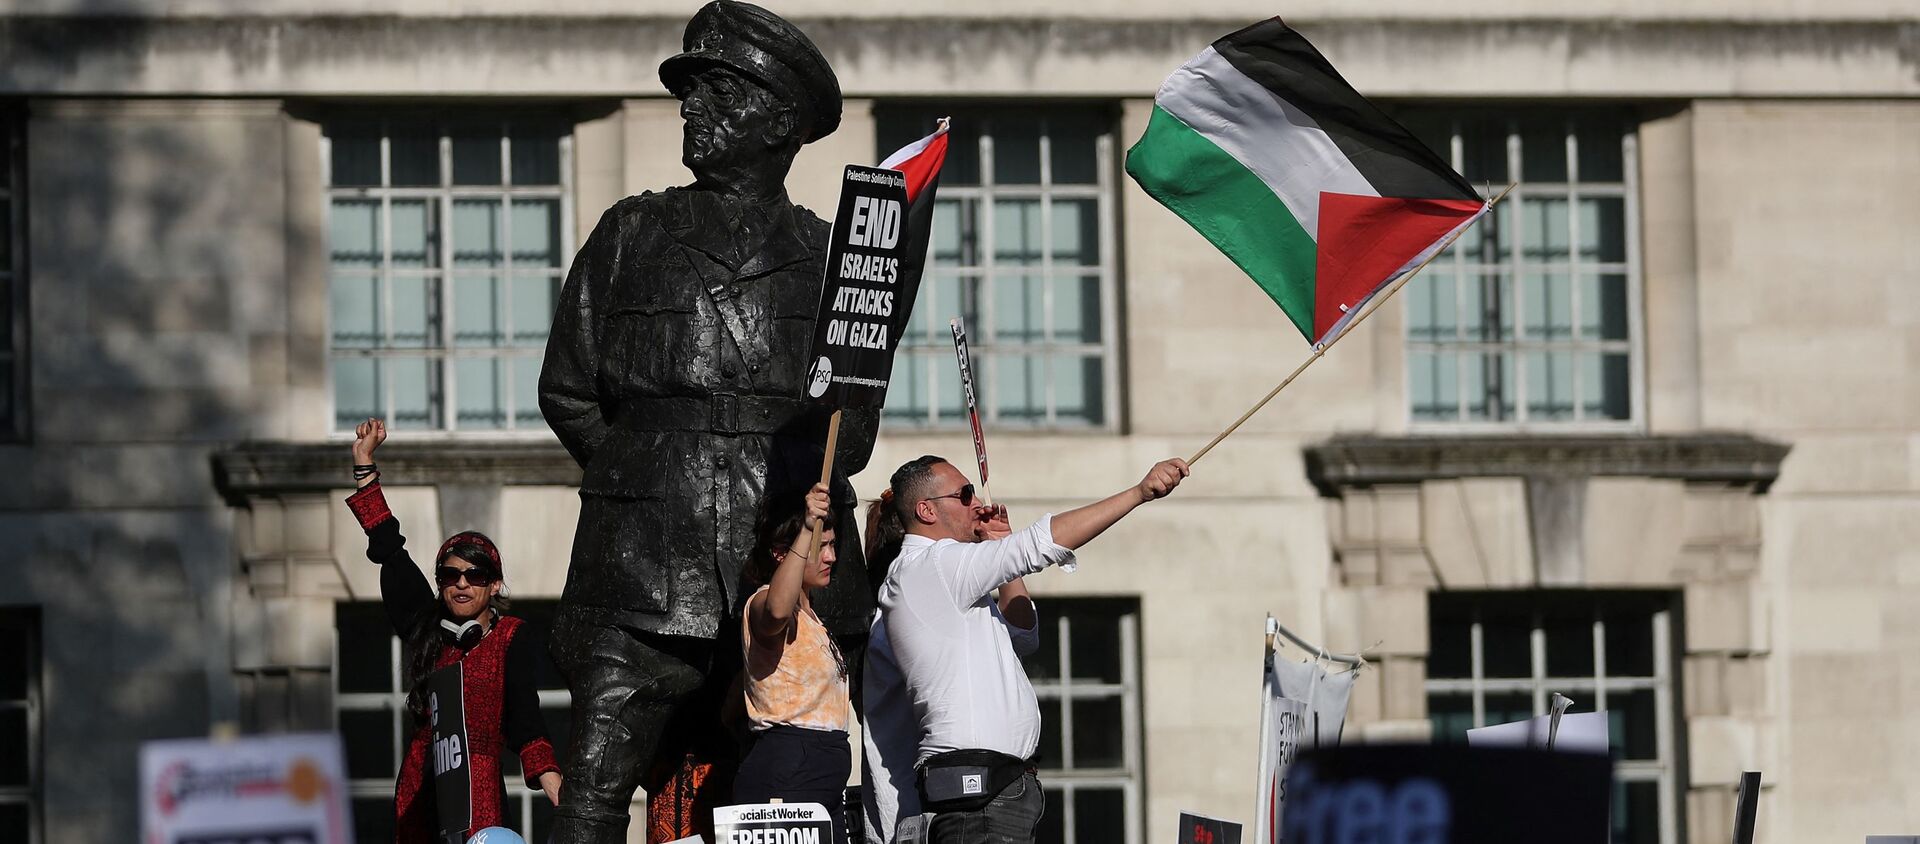 Pro-Palestine demonstrators hold placards and wave flags during a protest opposite the entrance to Downing Street in central London on May 15, 2018. - Sputnik International, 1920